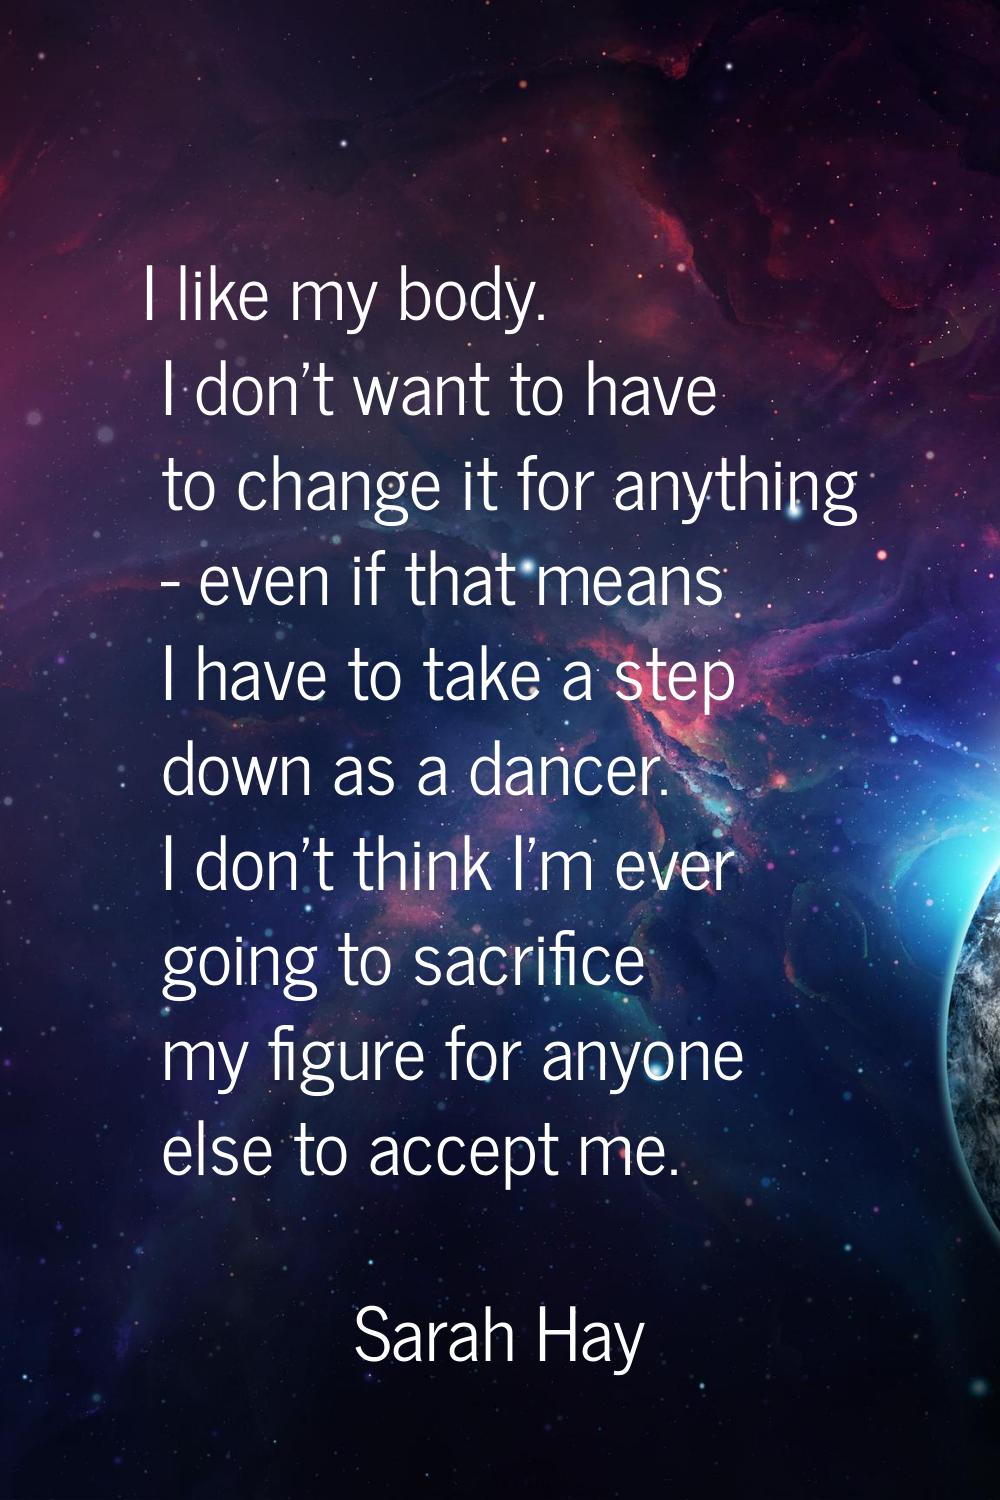 I like my body. I don't want to have to change it for anything - even if that means I have to take 